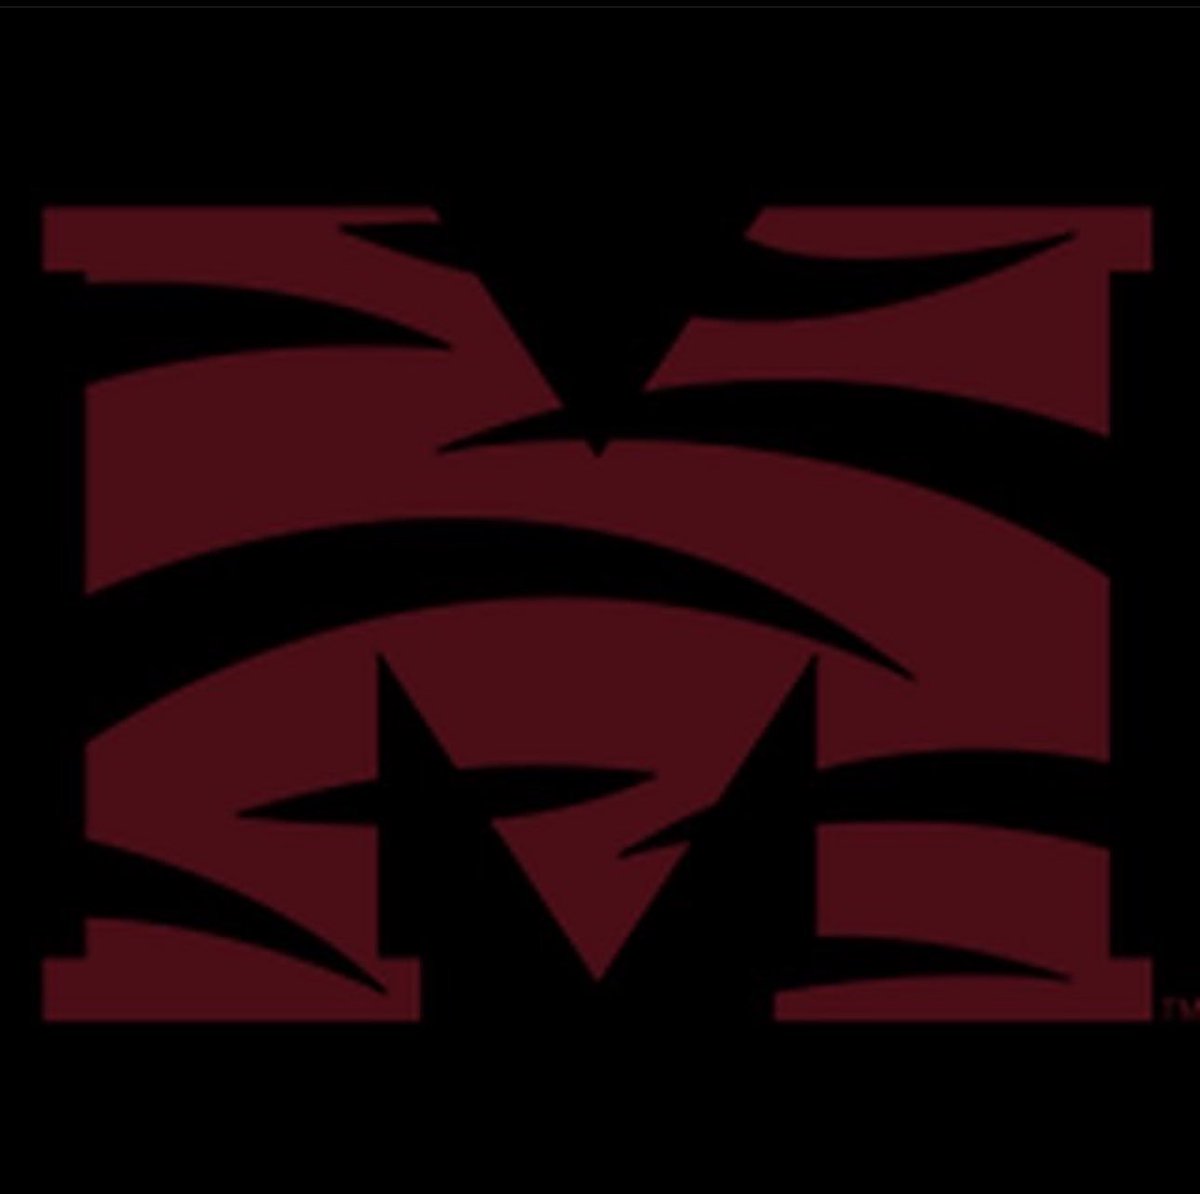 After a great conversation with @coachmathis81 I’m blessed to receive my first HBCU offer @MorehouseFB @Coach_Russ_6 @RecruitLambert @deucerecruiting @CoachDaniels06 @JeremyO_Johnson @ChadSimmons_ @One11Recruiting @MohrRecruiting @CJacksonPRZ @najehwilk @RyanWrightRNG @Rivals